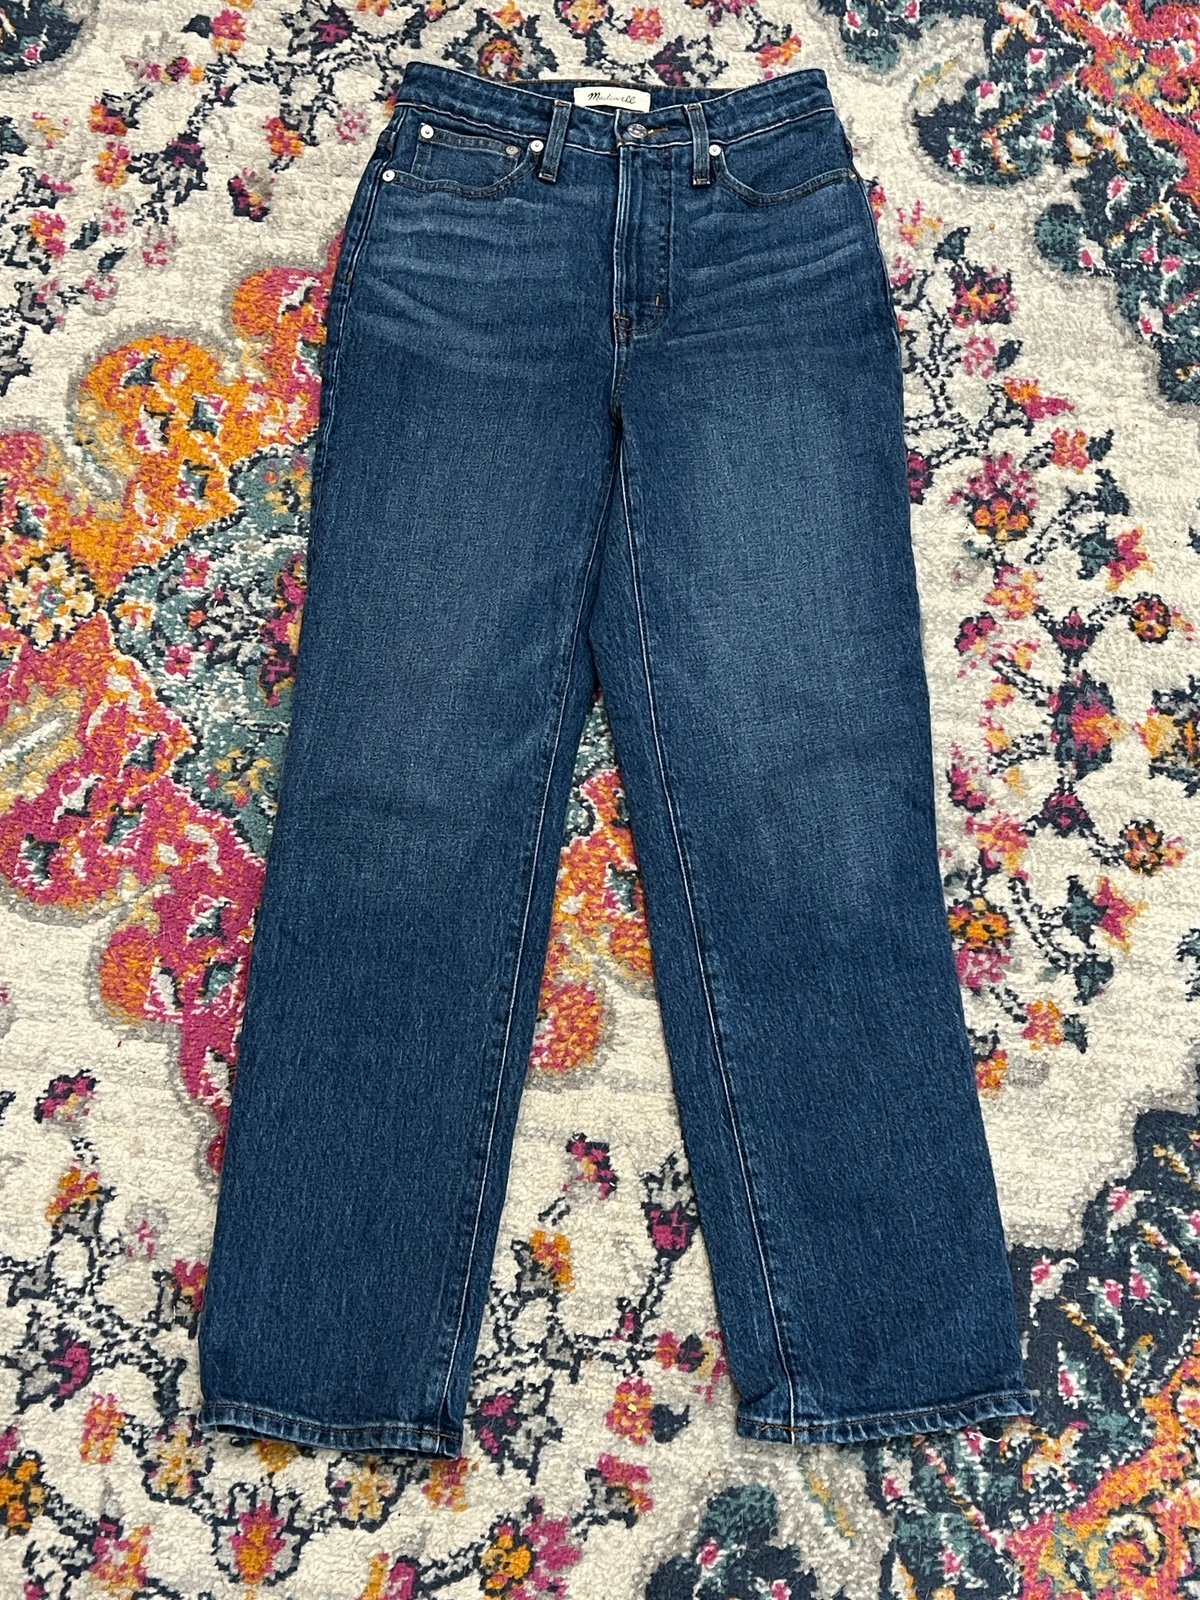 Gorgeous Madewell jeans nSGhCPBrM Online Shop